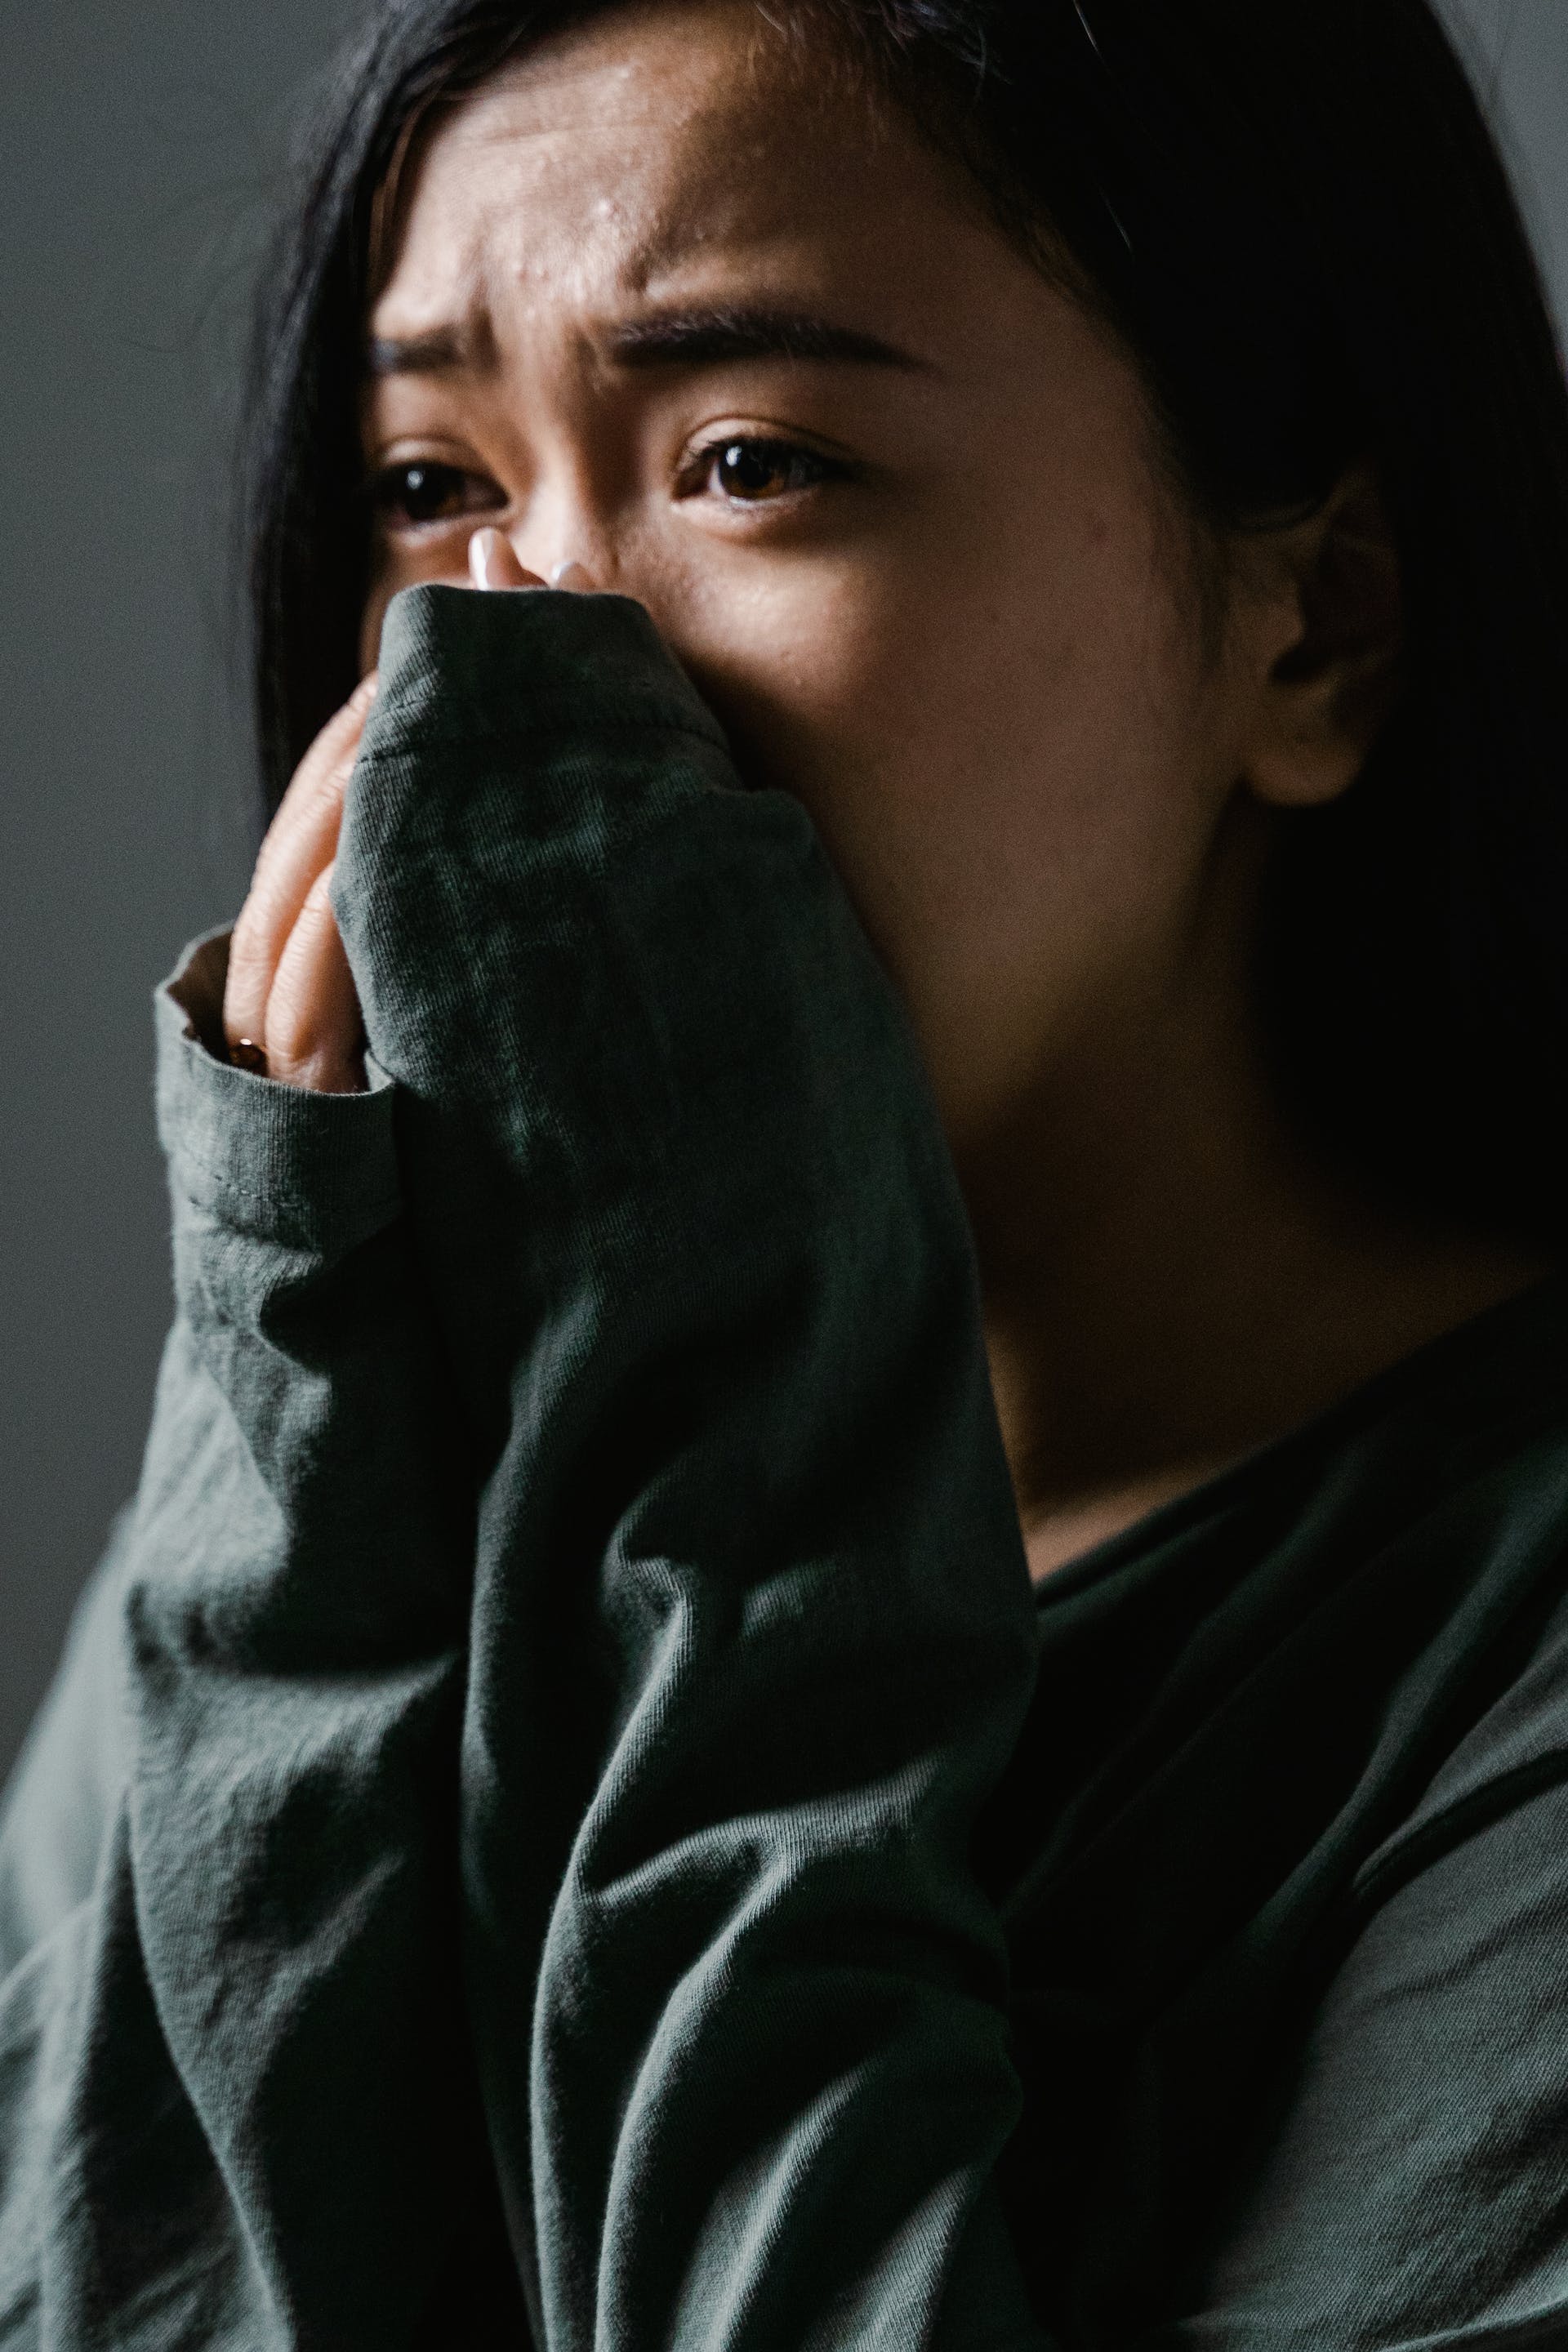 A scared woman | Source: Pexels